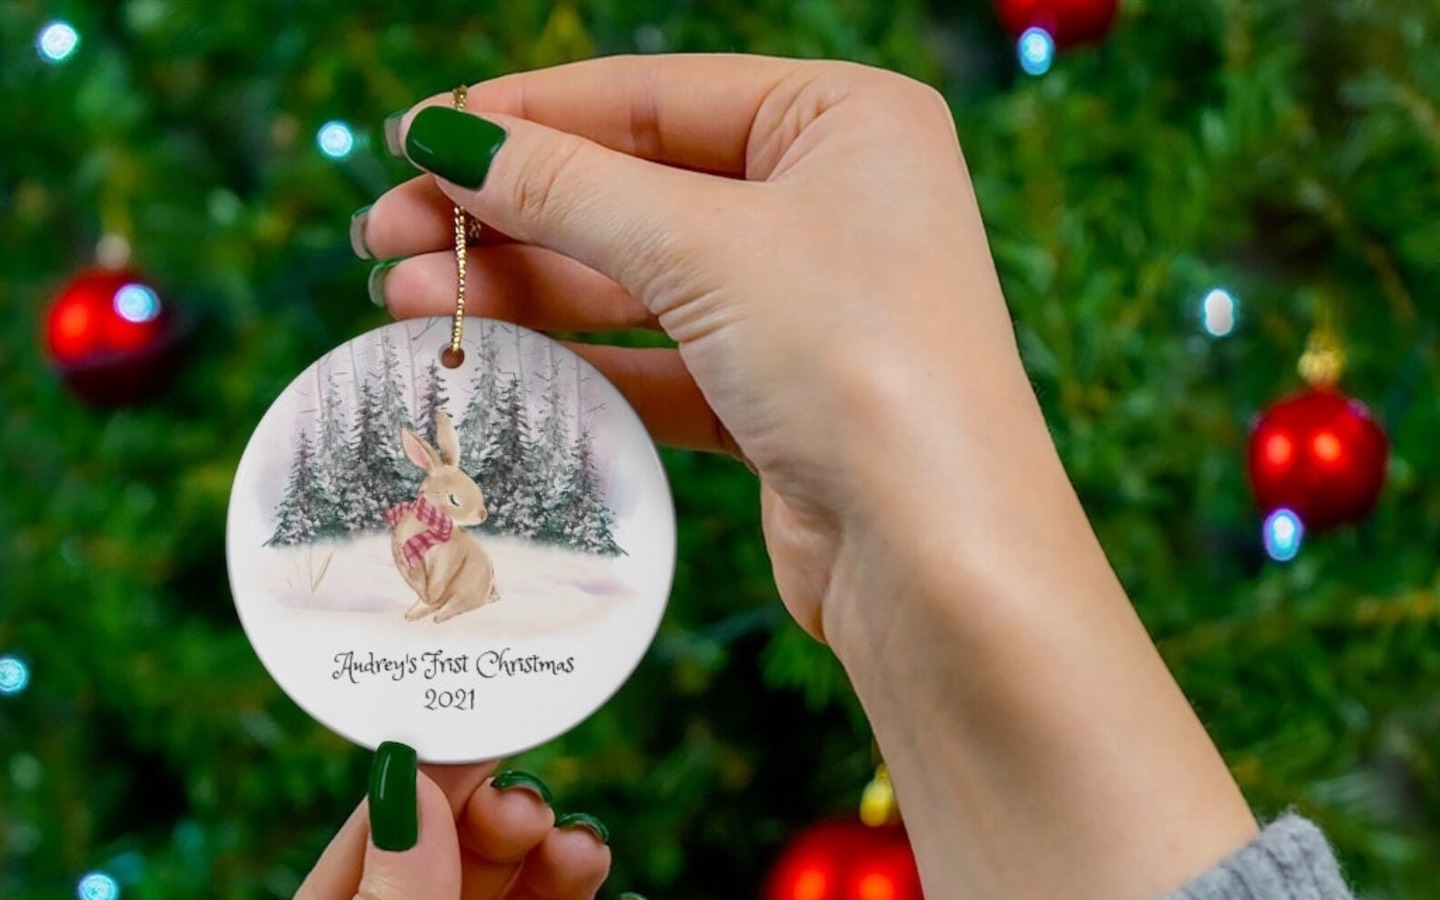 A personalized ornament, designed by a Roosevelt alumna.